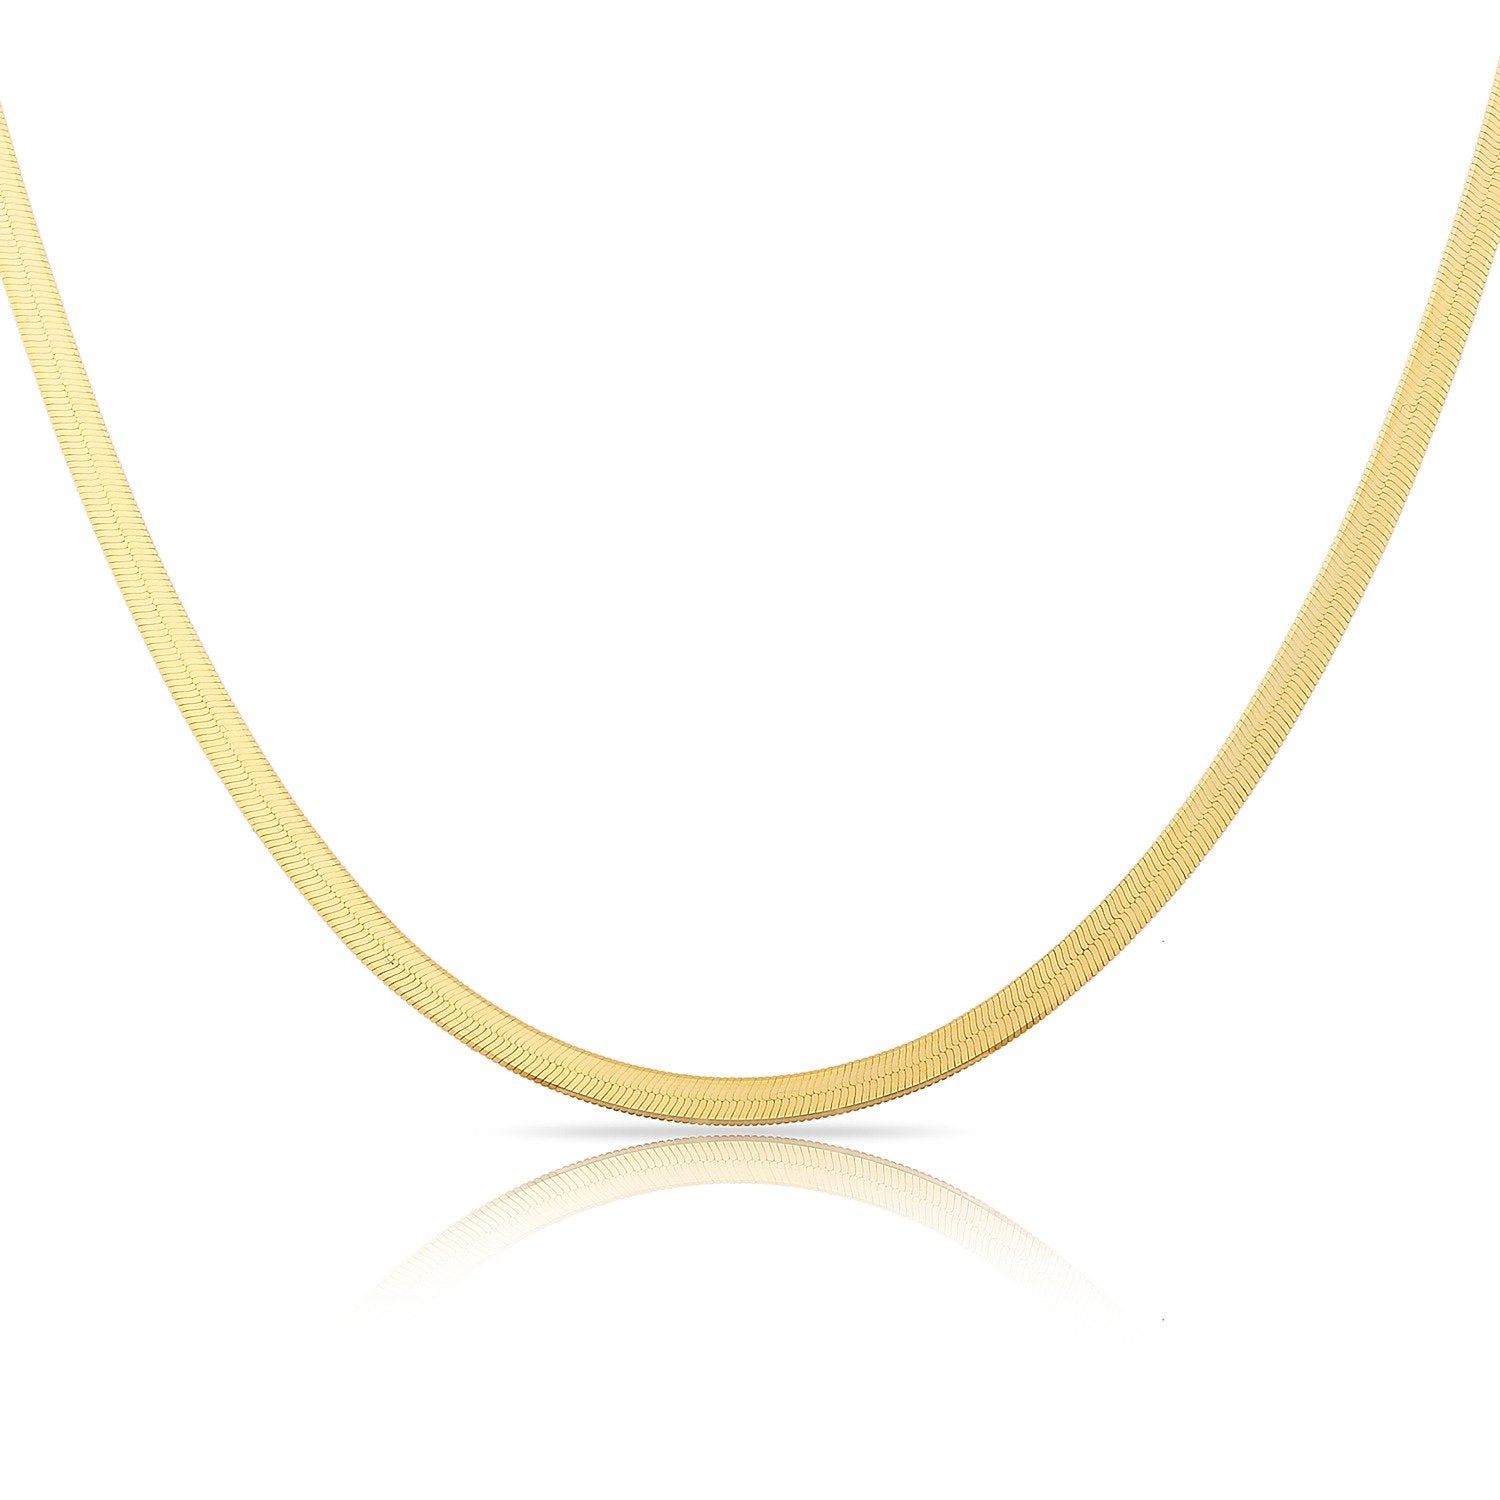 TSK 14k Gold Herringbone Chain JEWELRY The Sis Kiss 14k Gold 12" with 4" extension 